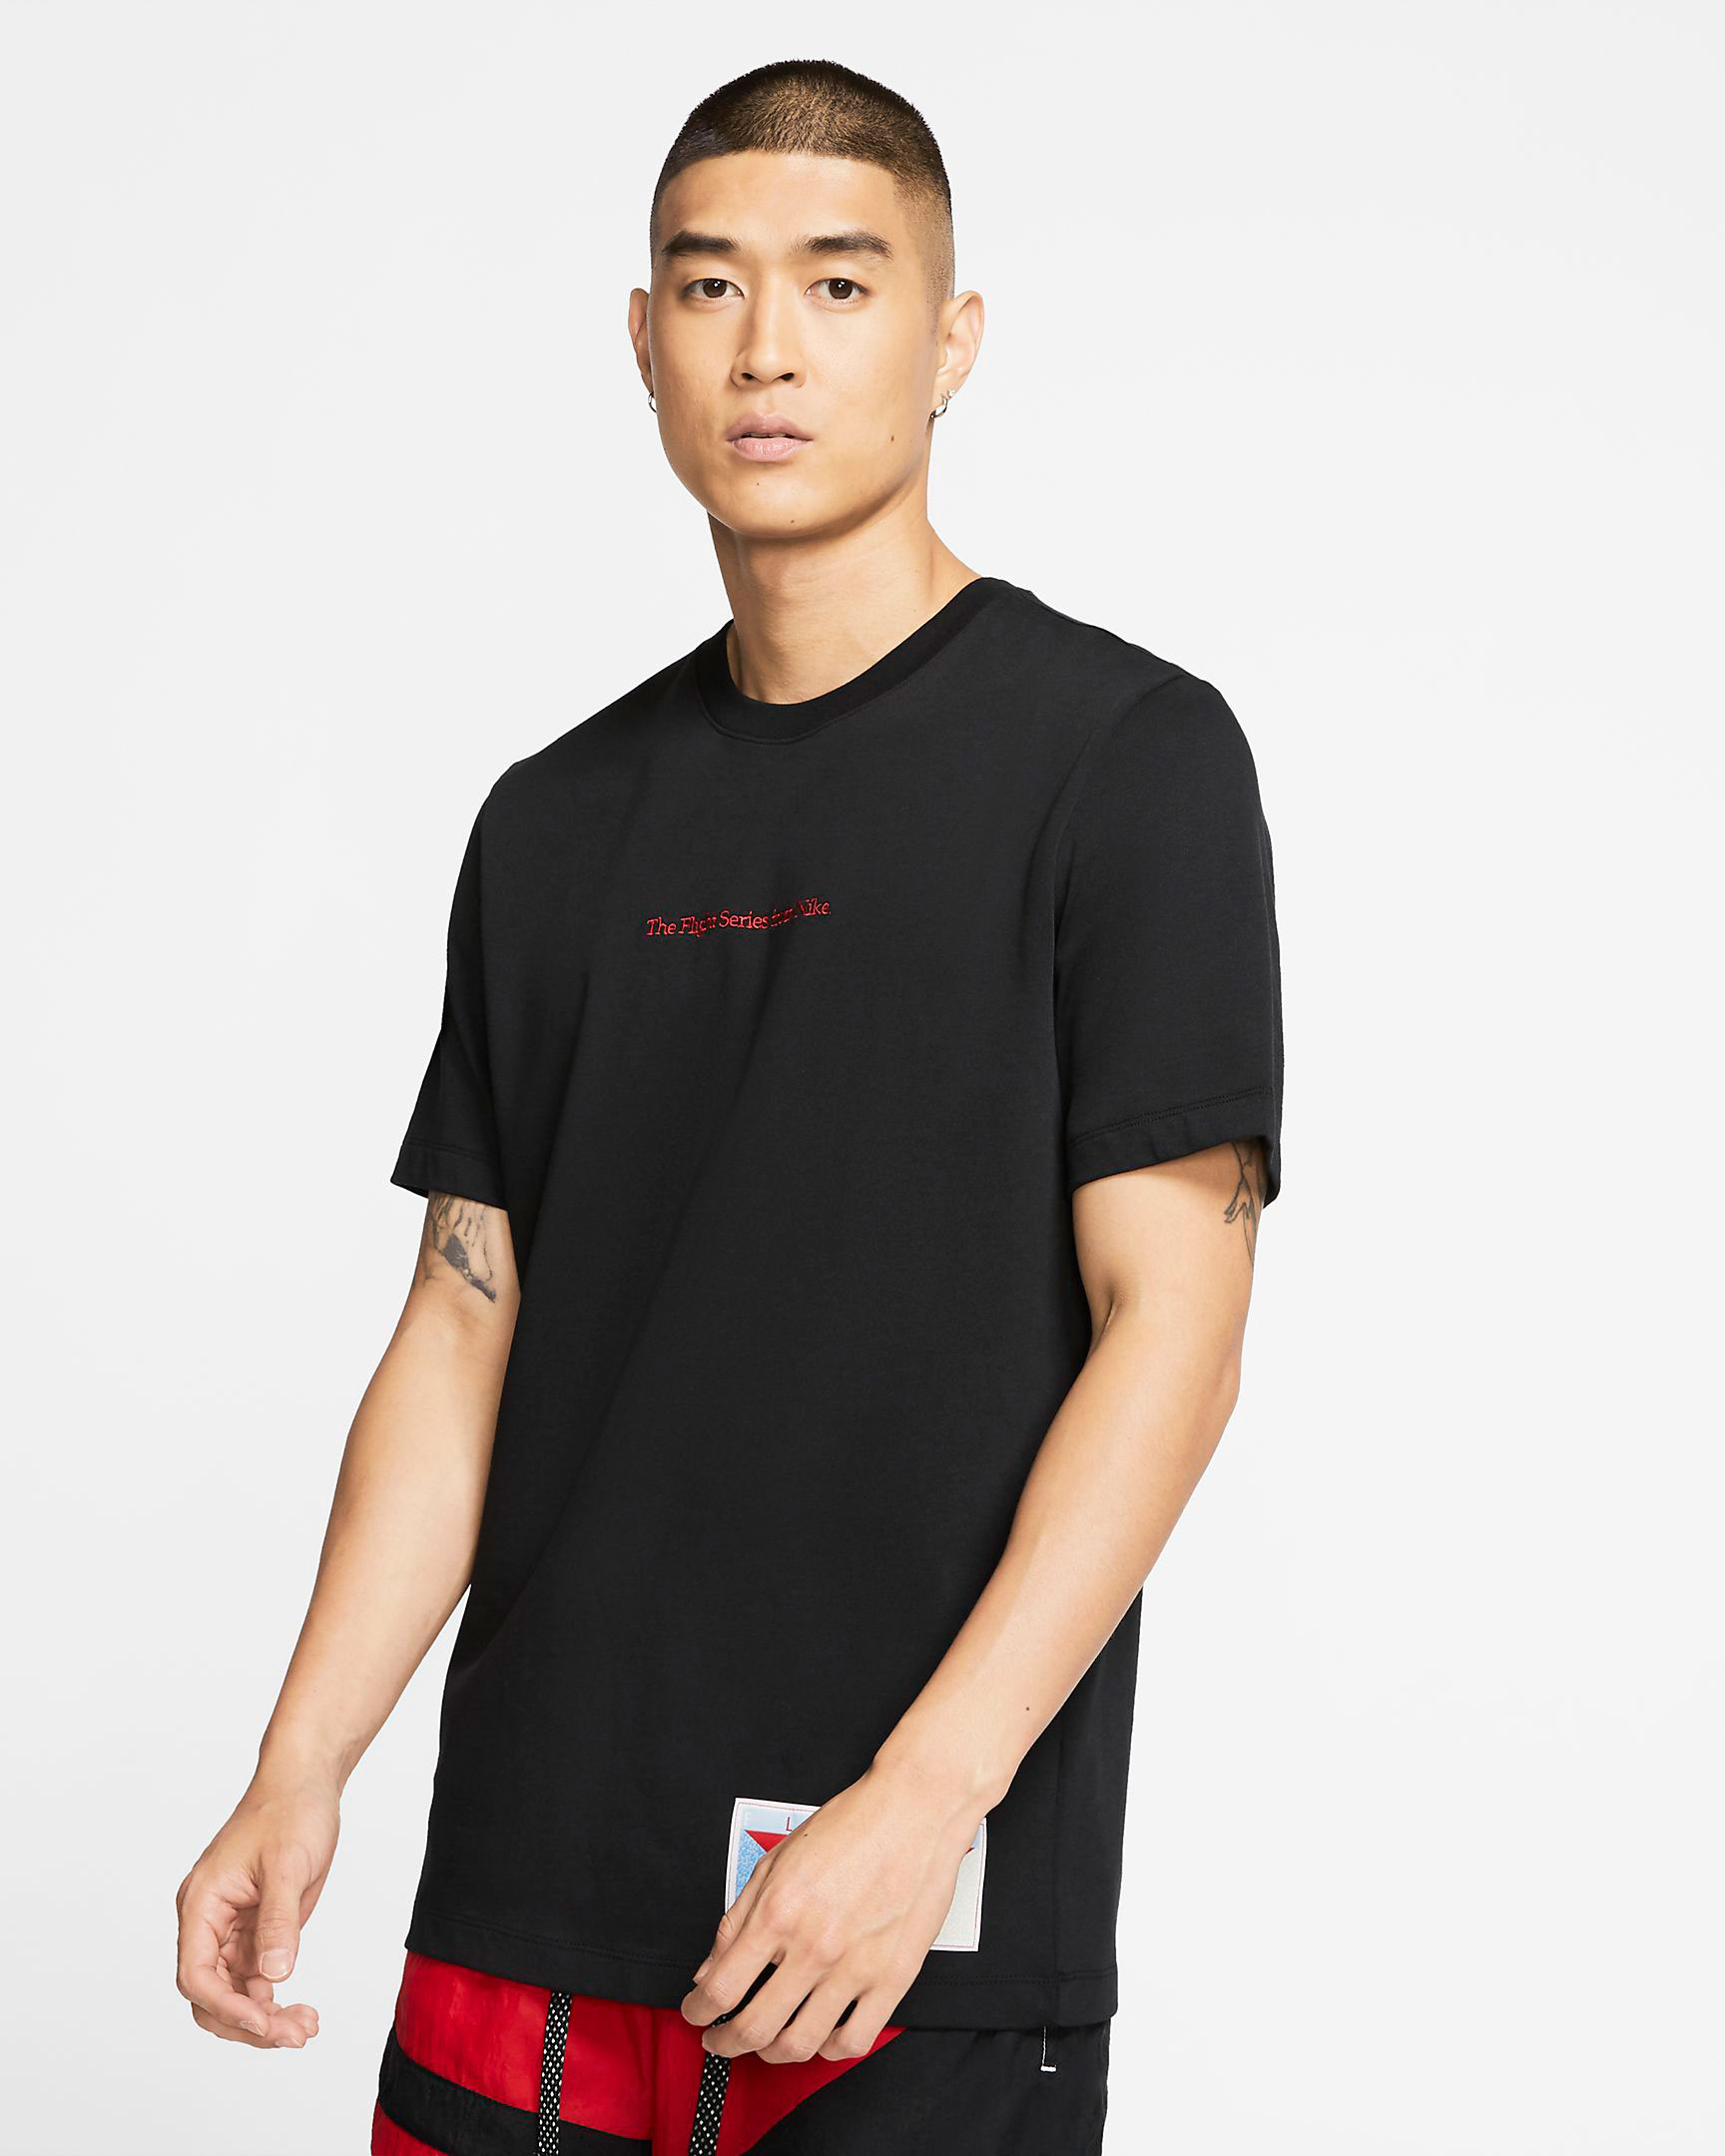 the flight series from nike tee